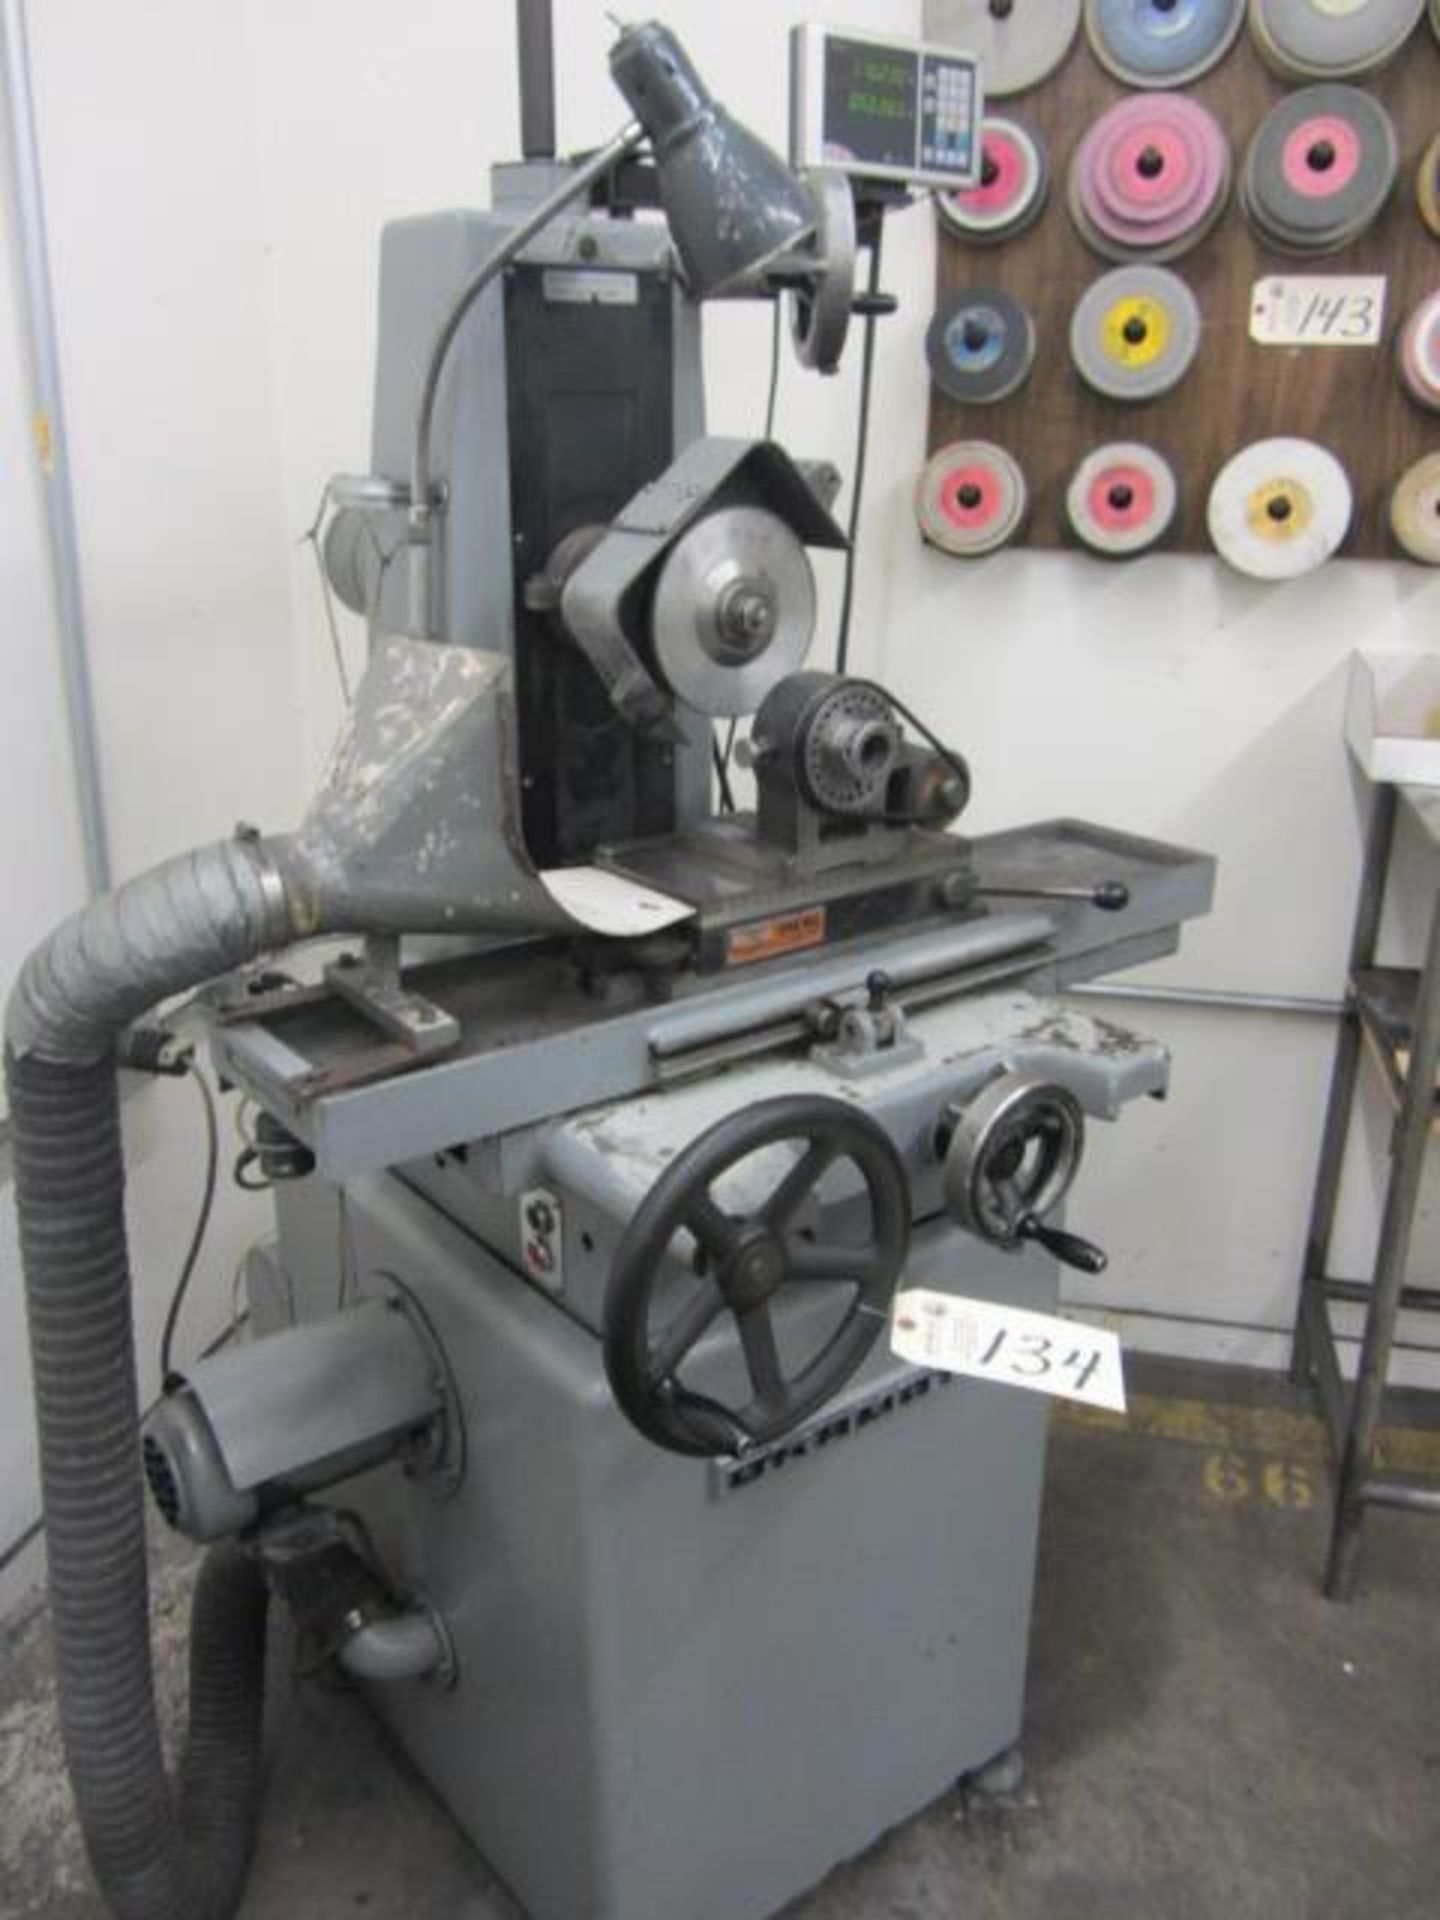 Okamoto OMA-350 6'' x 12'' Hand Feed Surface Grinder with Permanent Magnetic Chuck, Fagor Innova - Image 6 of 6